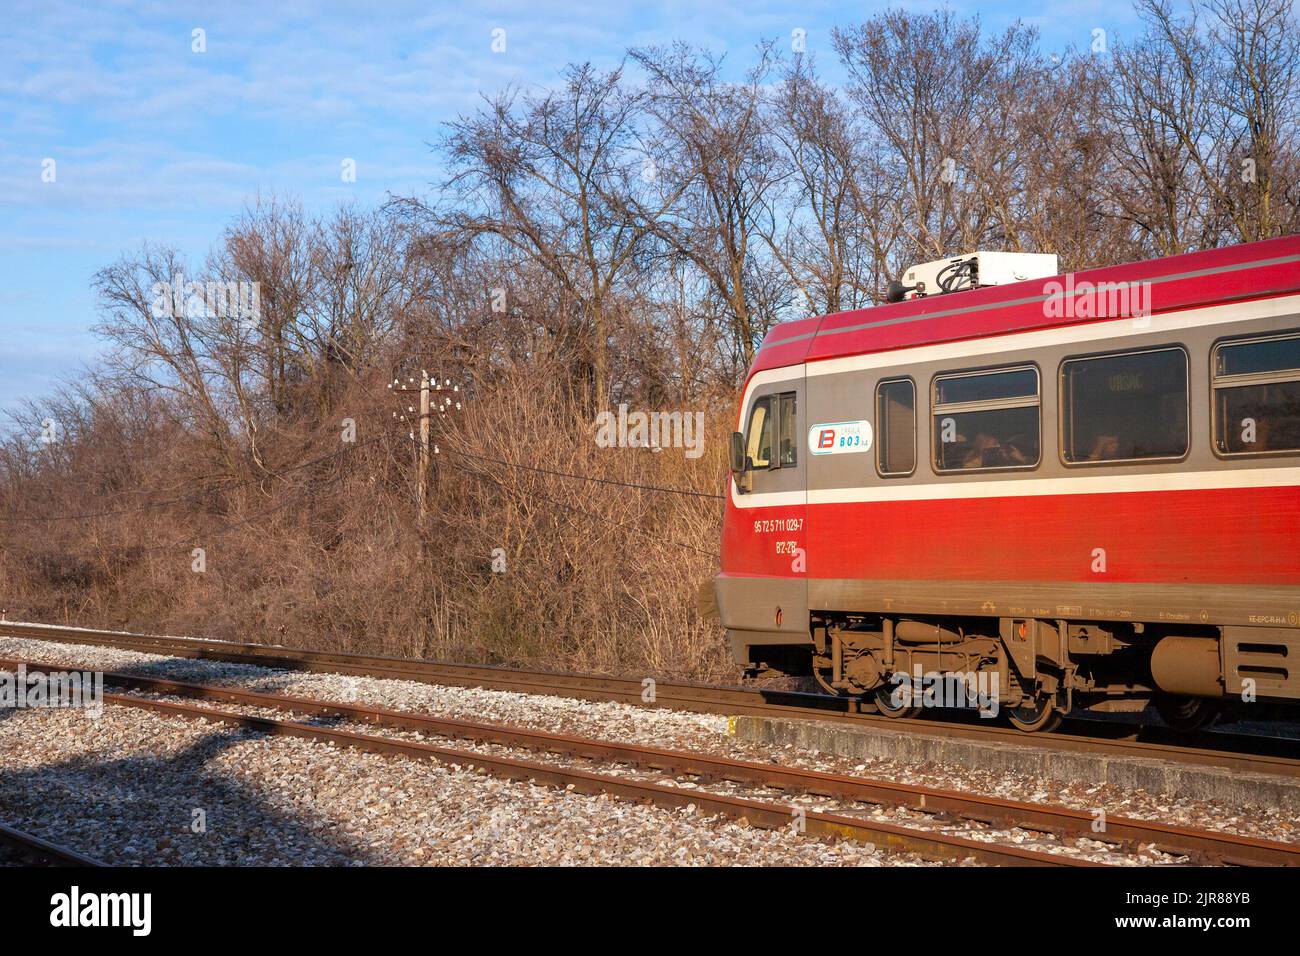 Picture of a train crossing the city of banatsko novo selo, Serbia, operated by Srbija voz, the national passenger railways of Serbia. Stock Photo